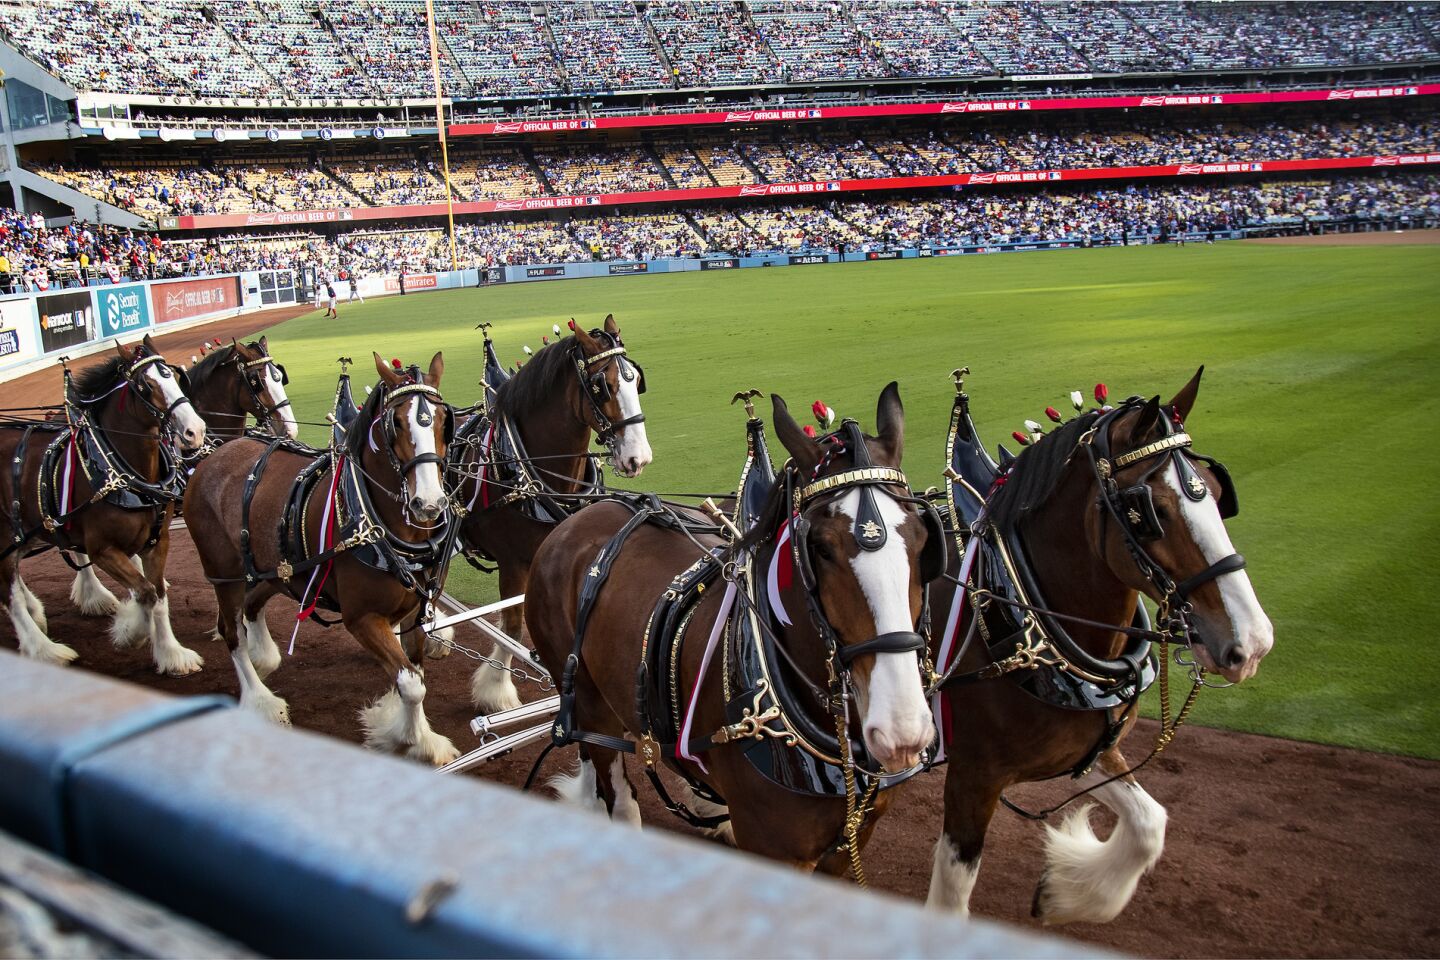 Clydesdale horses trot along the warning track before the start of Game 5.